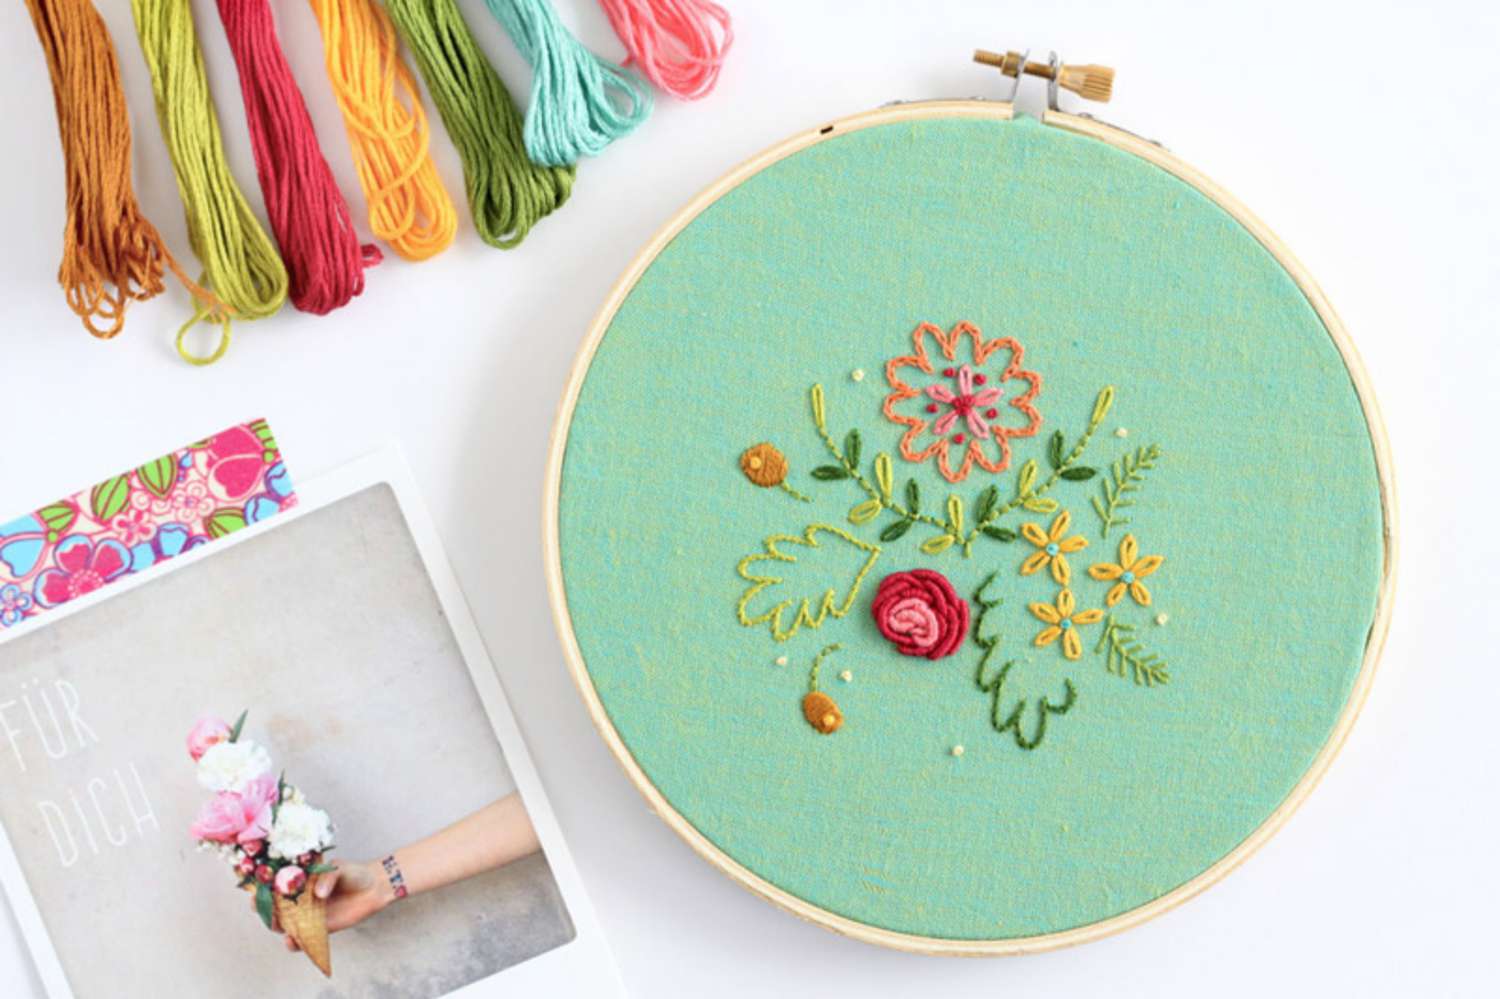 Sweet Posy Embroidery Pattern on Teal Fabric